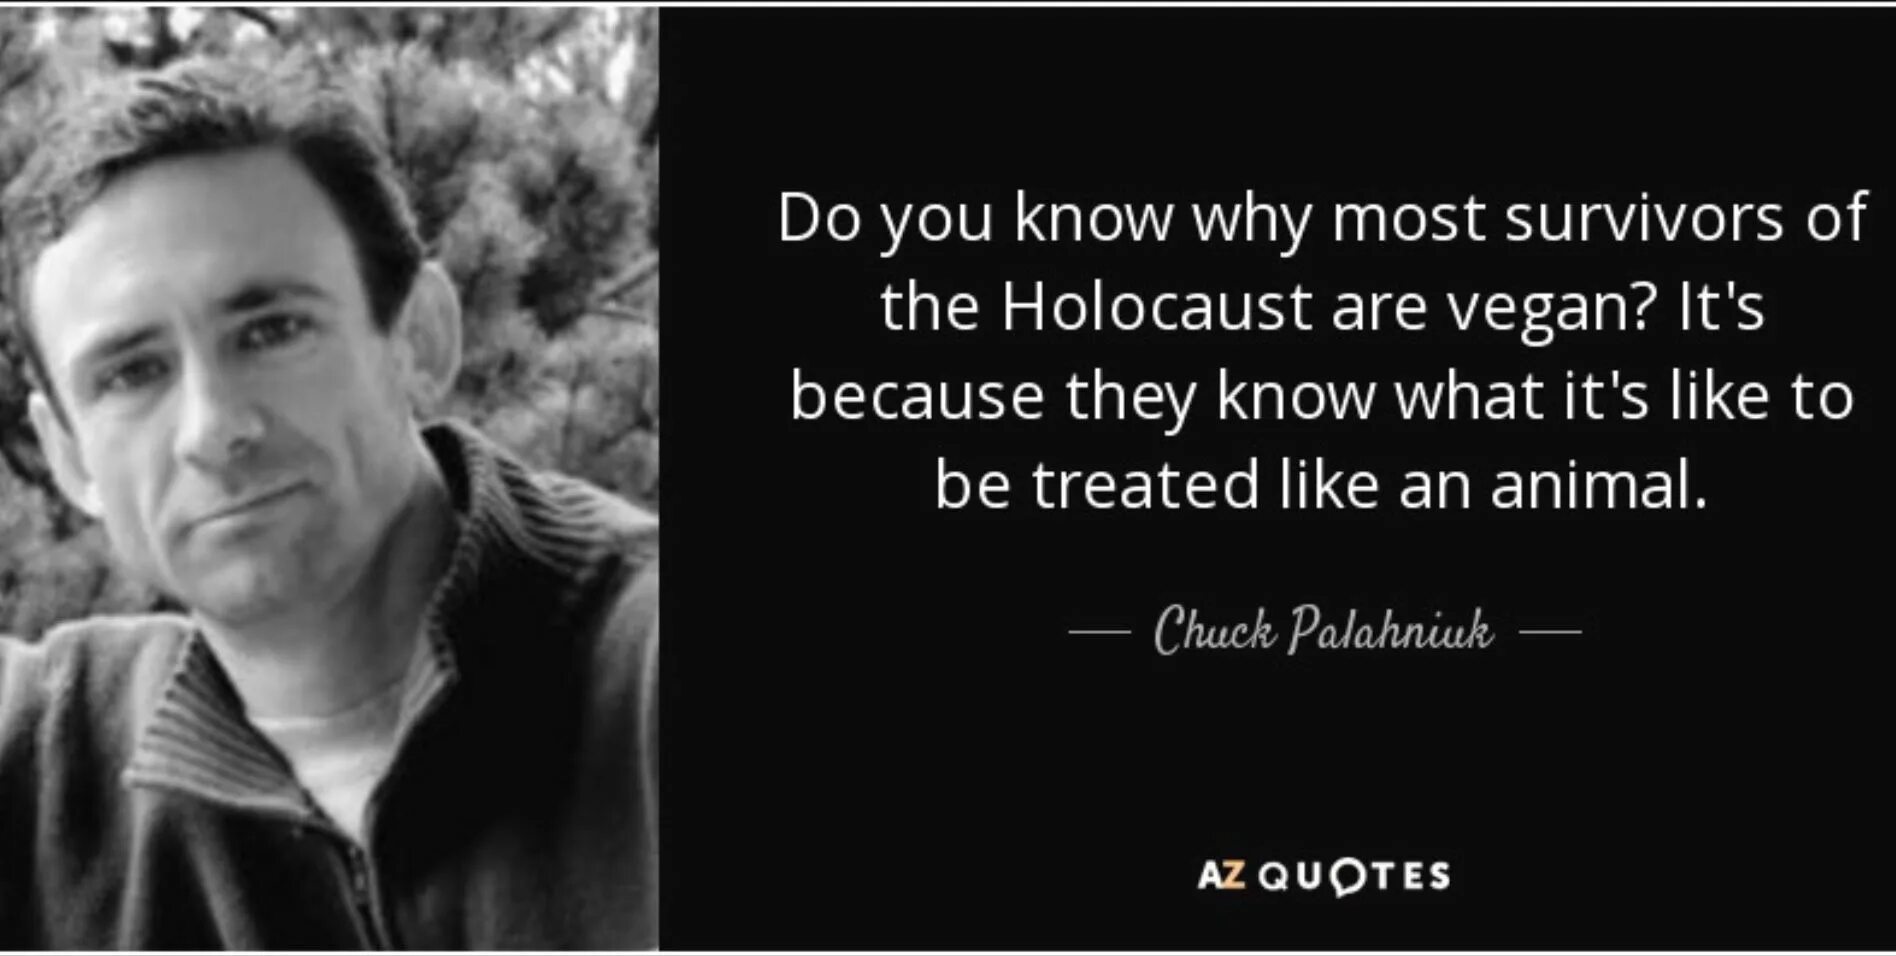 People want to live in an. Palahniuk Chuck "tell-all". A person who thinks all the time Мем. Do not resurrect исполнитель. Quotes from great people.